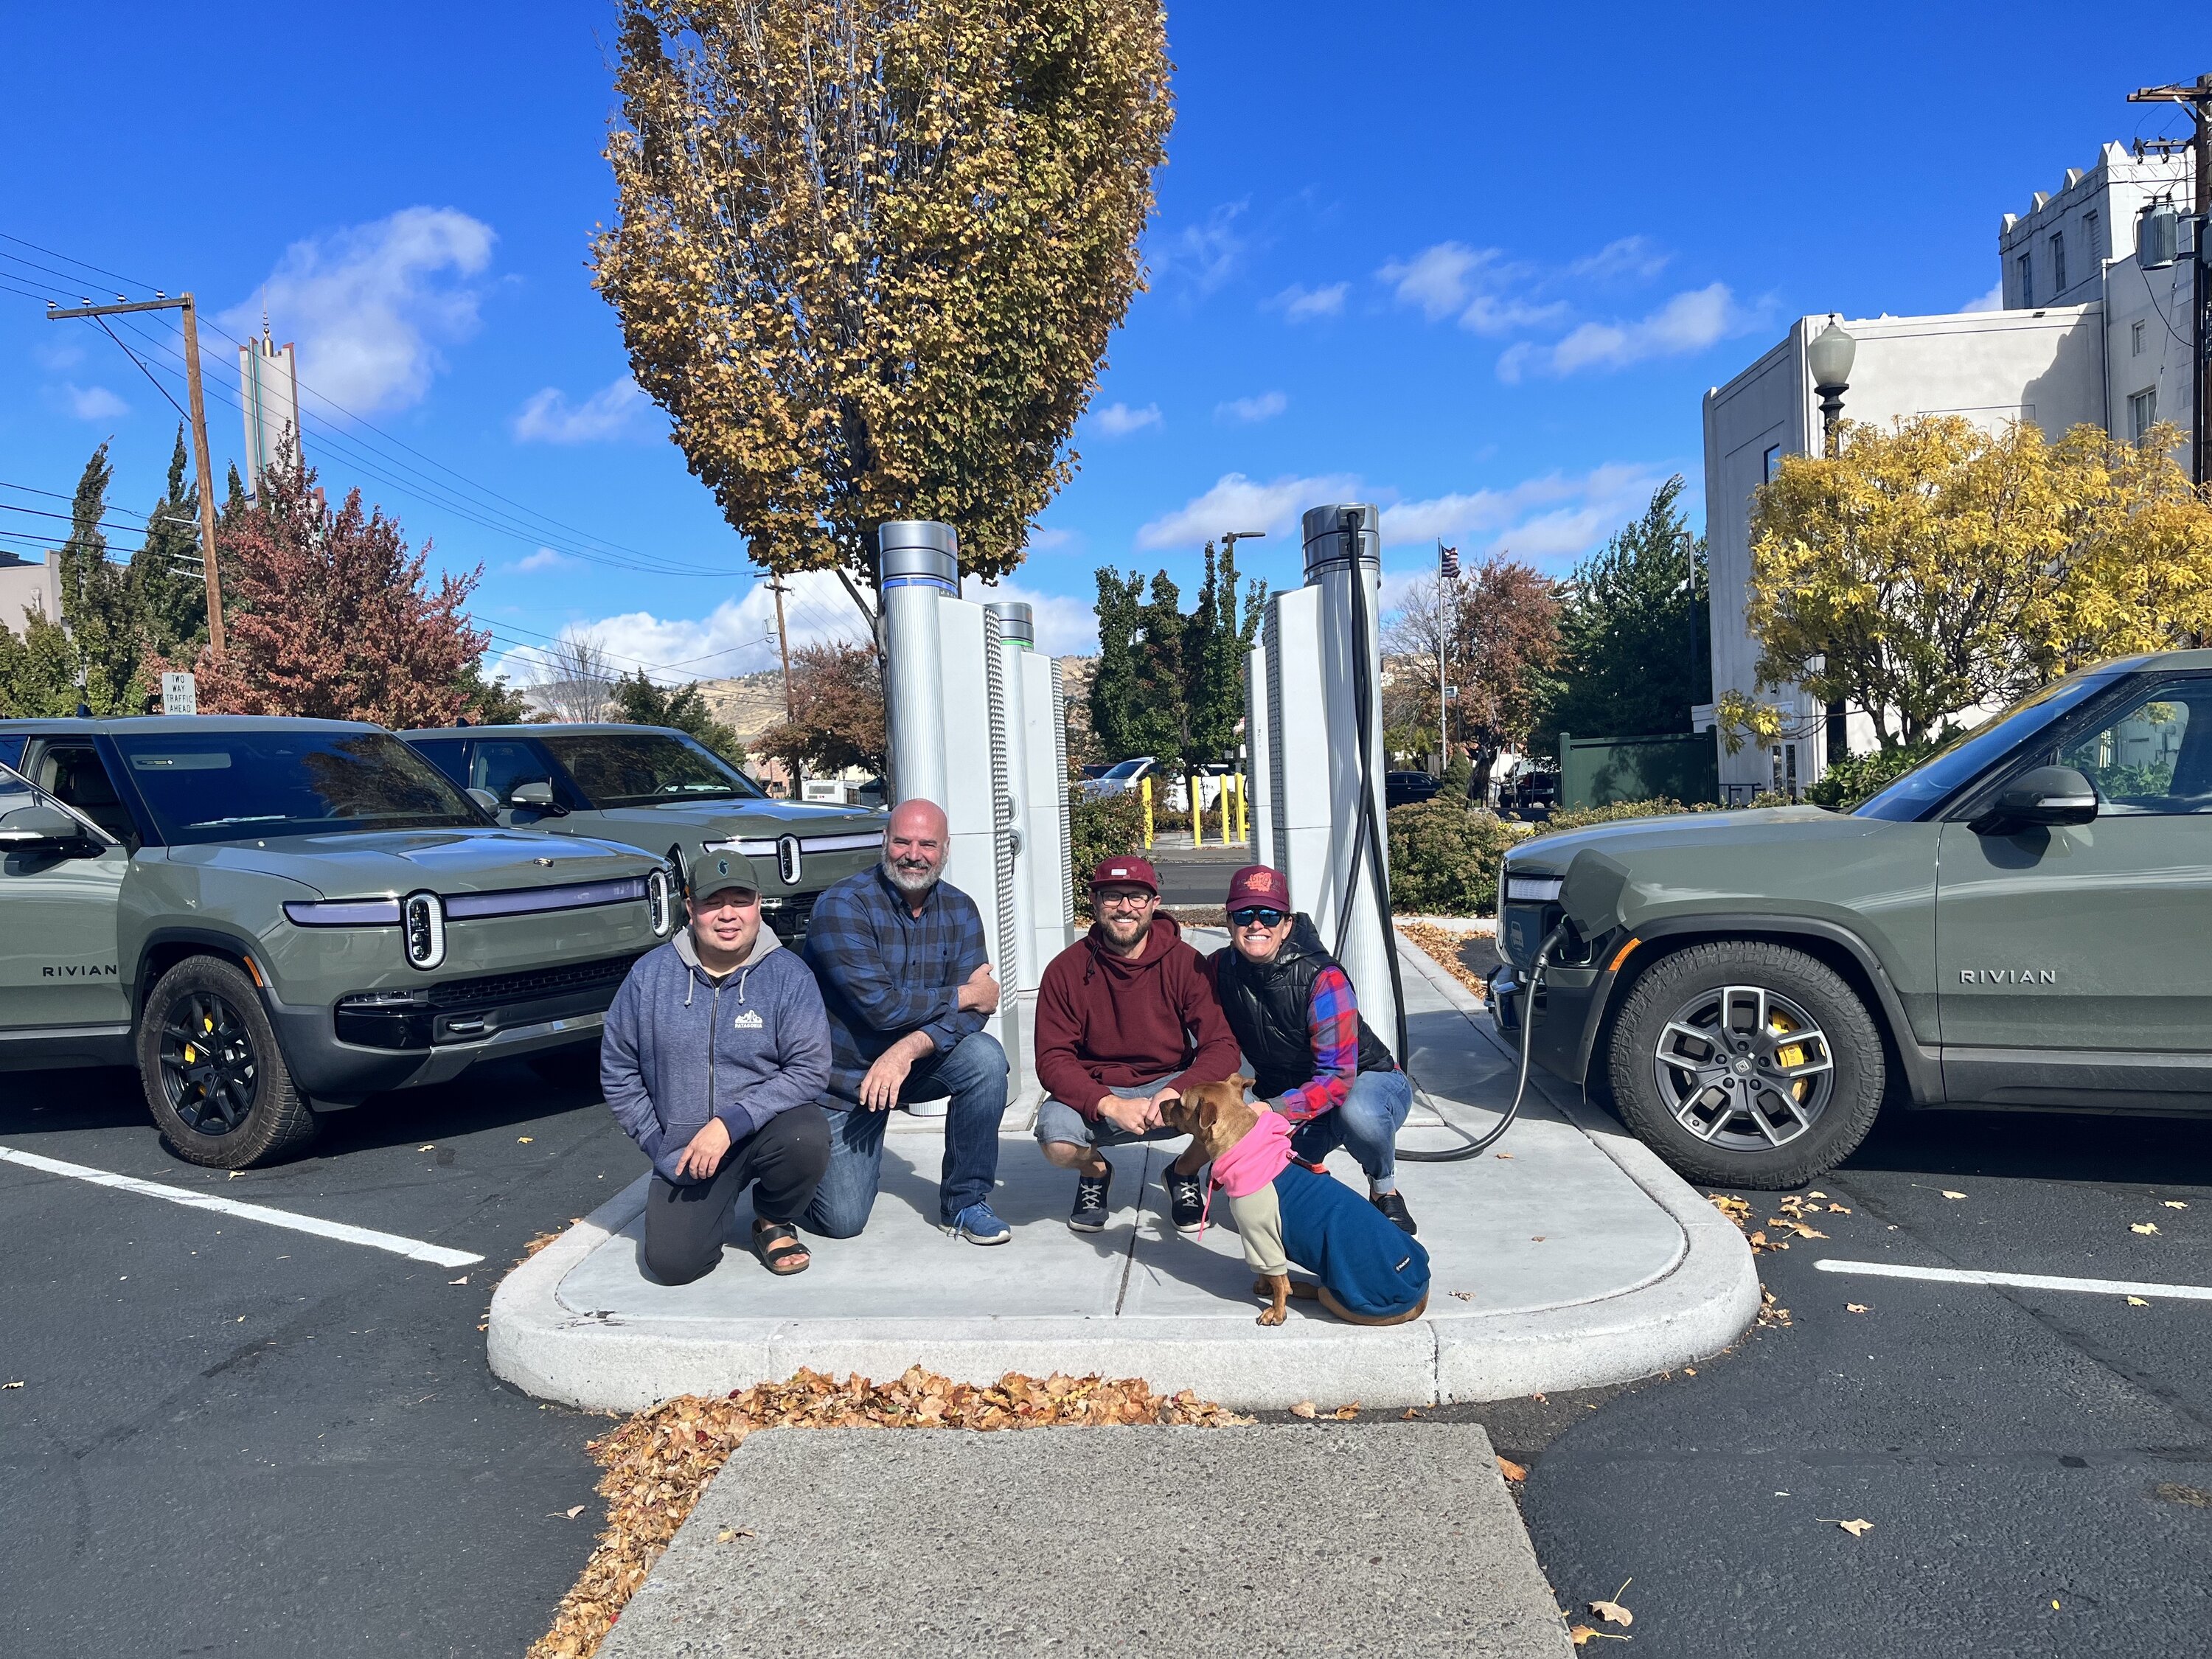 Rivian R1T R1S Grateful and Adventurous Forever For Meeting Amazing Rivian Folks the Last Two Weeks Klamath